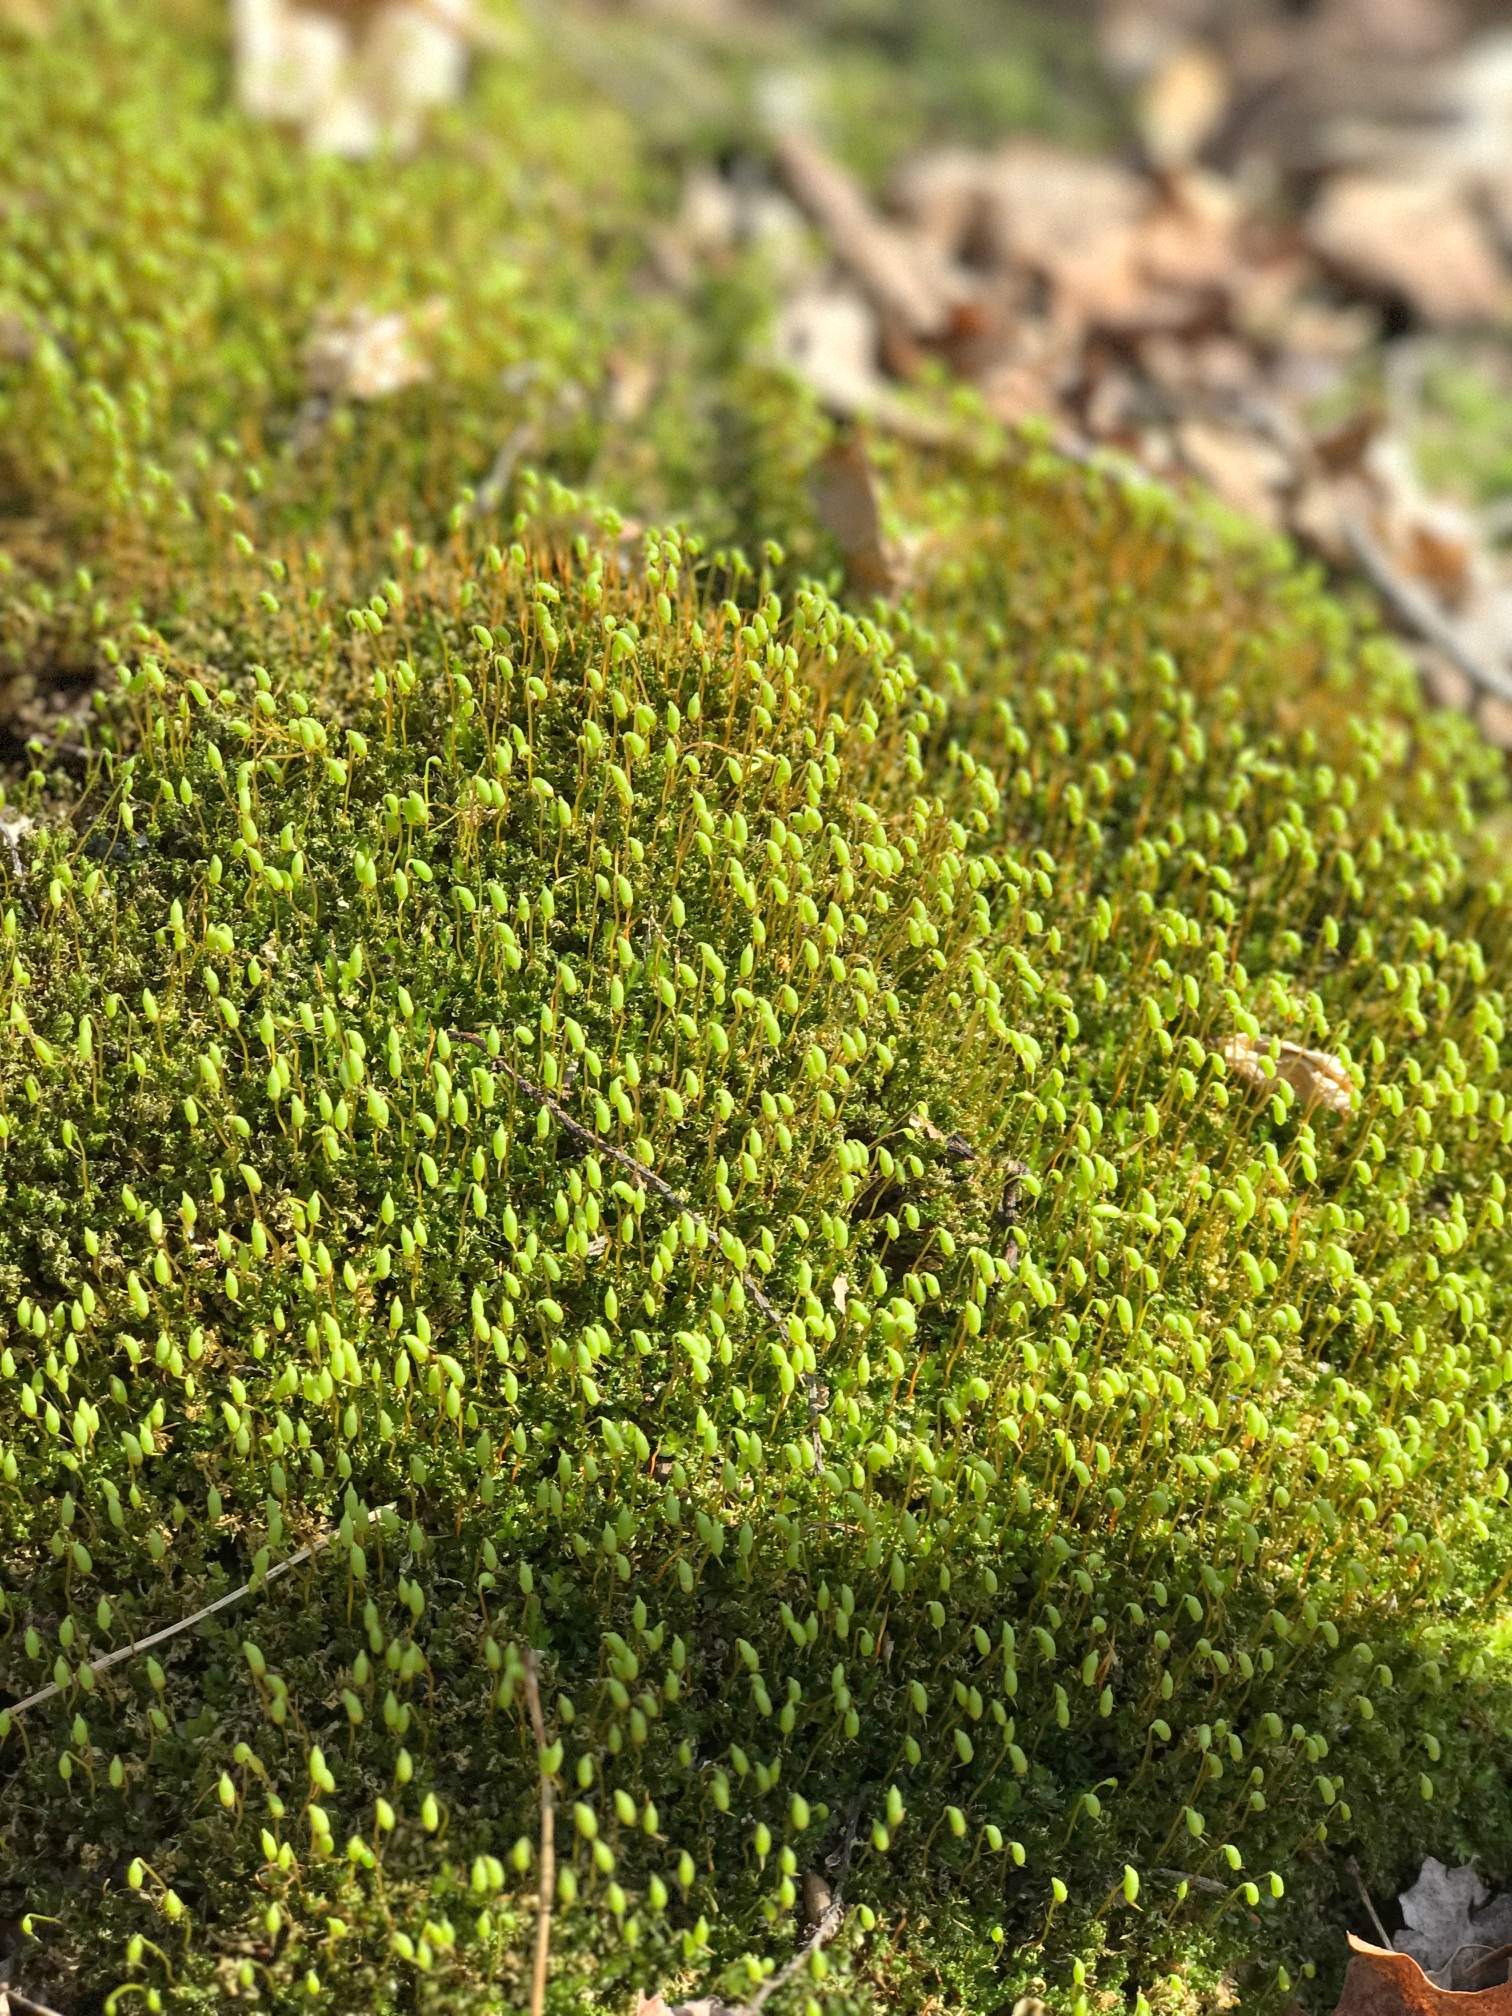 With not much greening (still early in the spring) mossy areas sticking out nicely. April 13th, 2017.